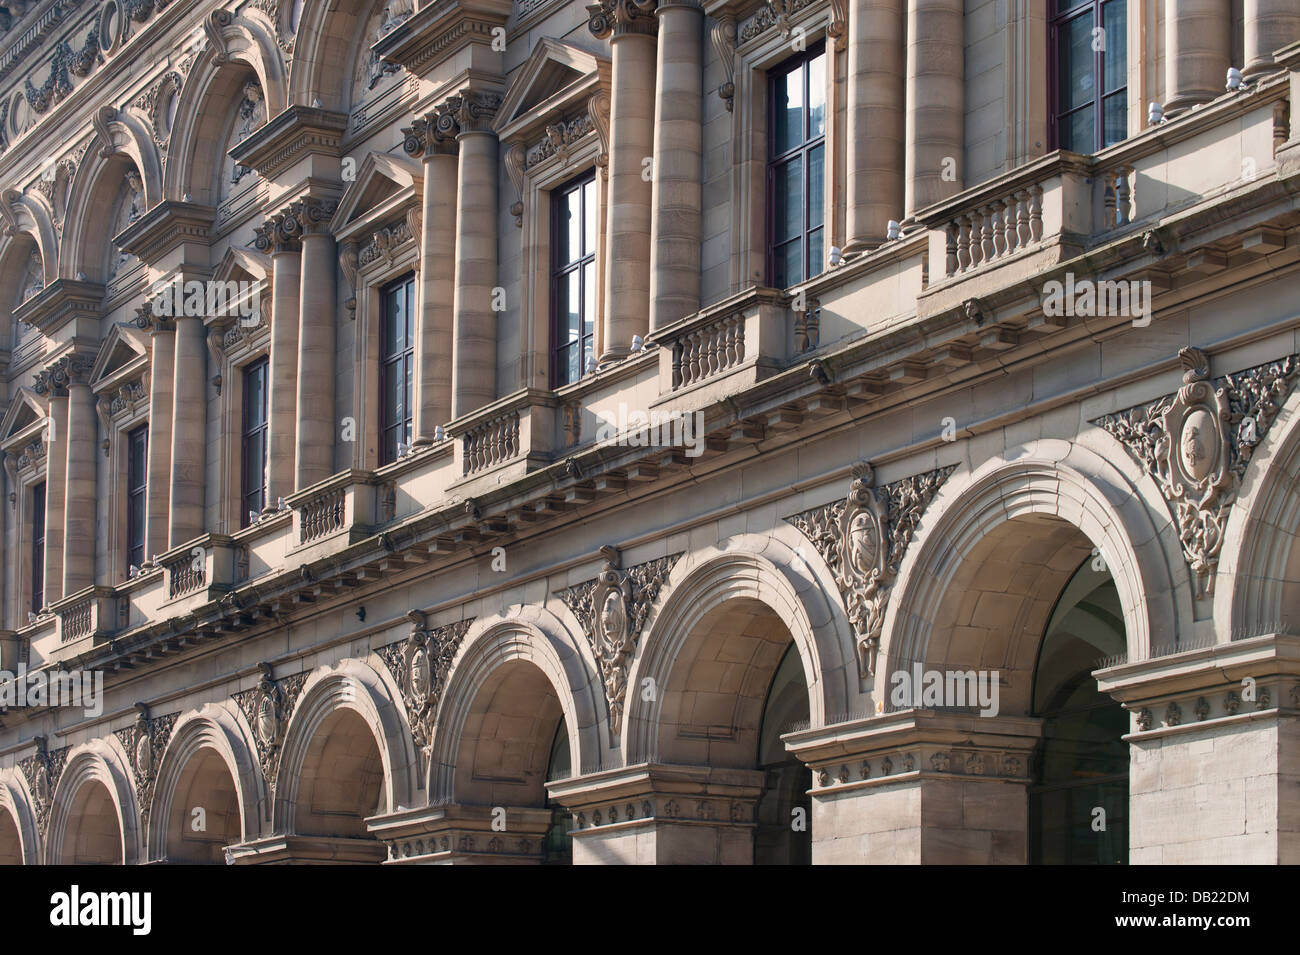 An abstract view of the Free Trade Hall on Peter Street in Manchester city centre. Stock Photo